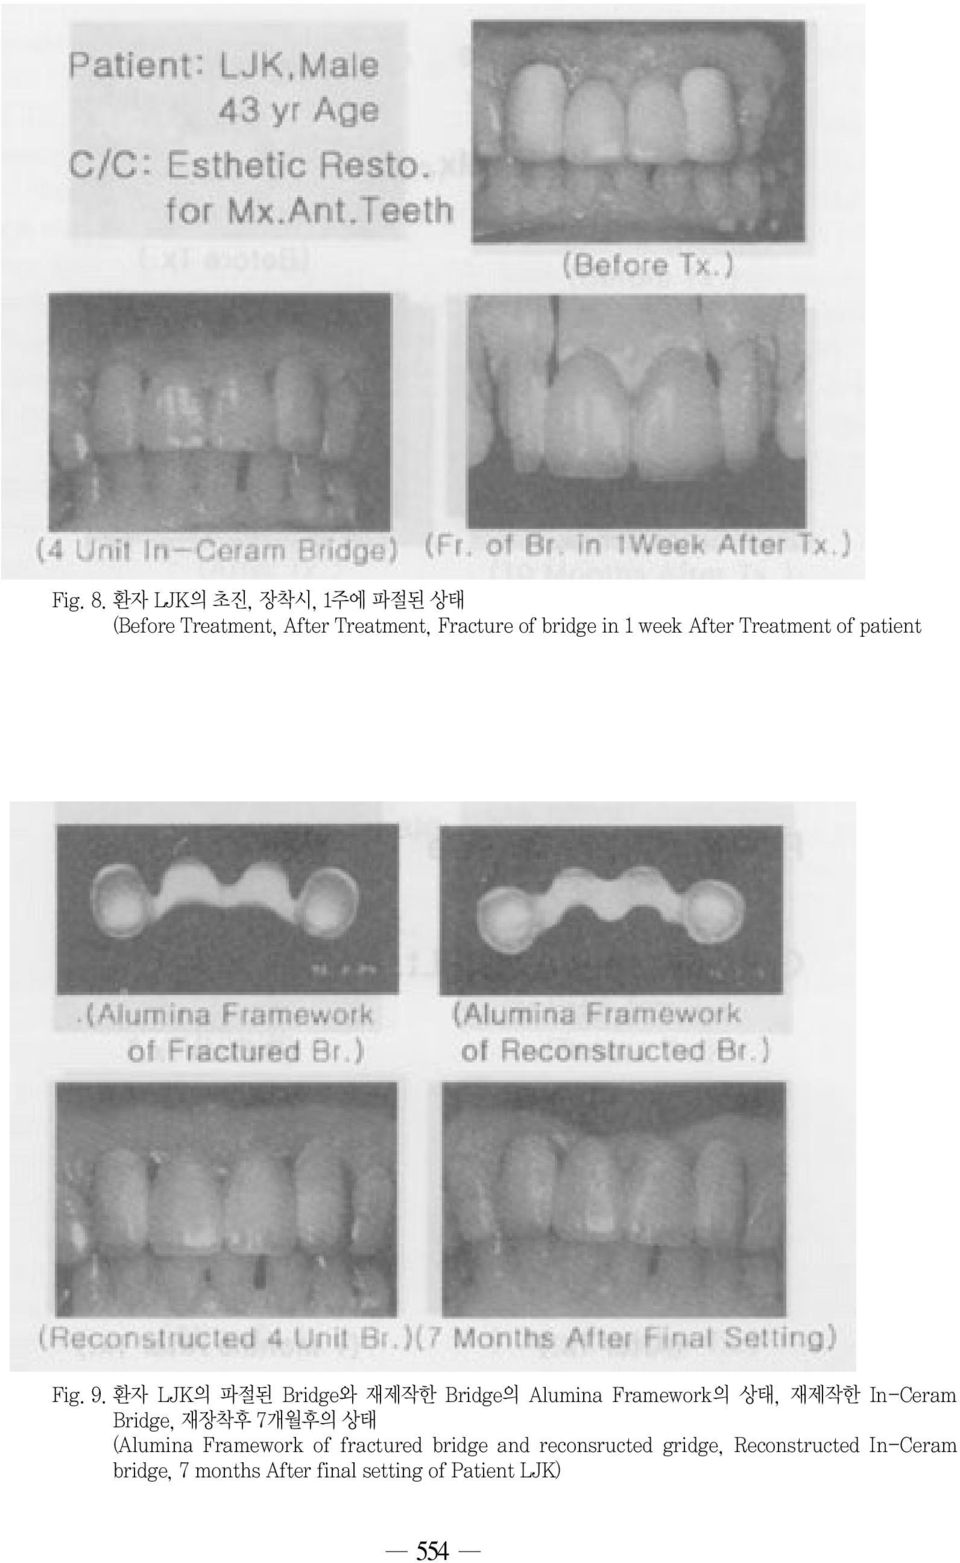 After Treatment of patient Fig. 9.